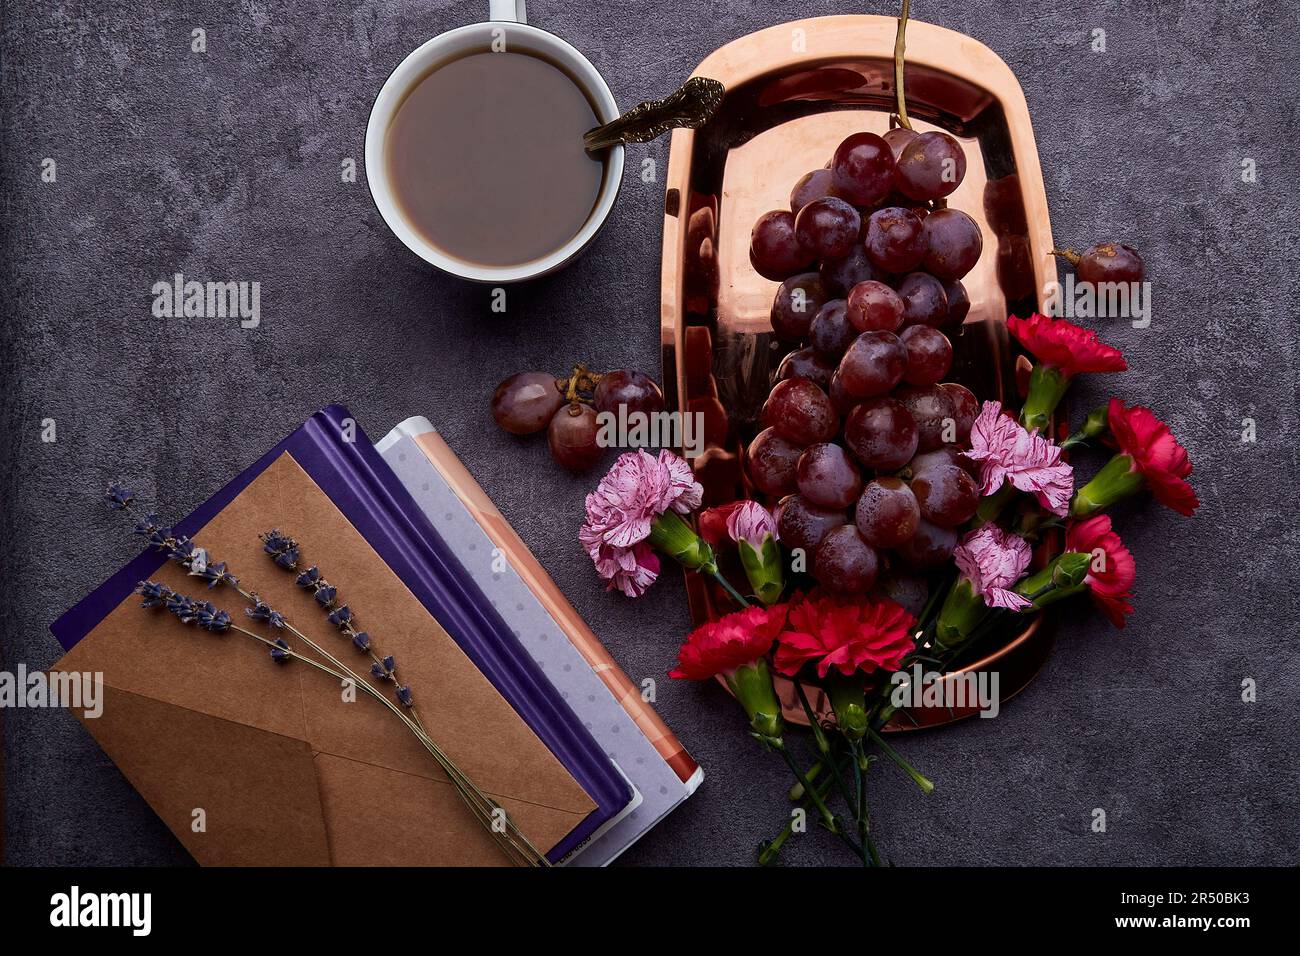 Summer flat lay breakfast with grapes, cup of coffee, books and flowers on the golden tray. Stock Photo